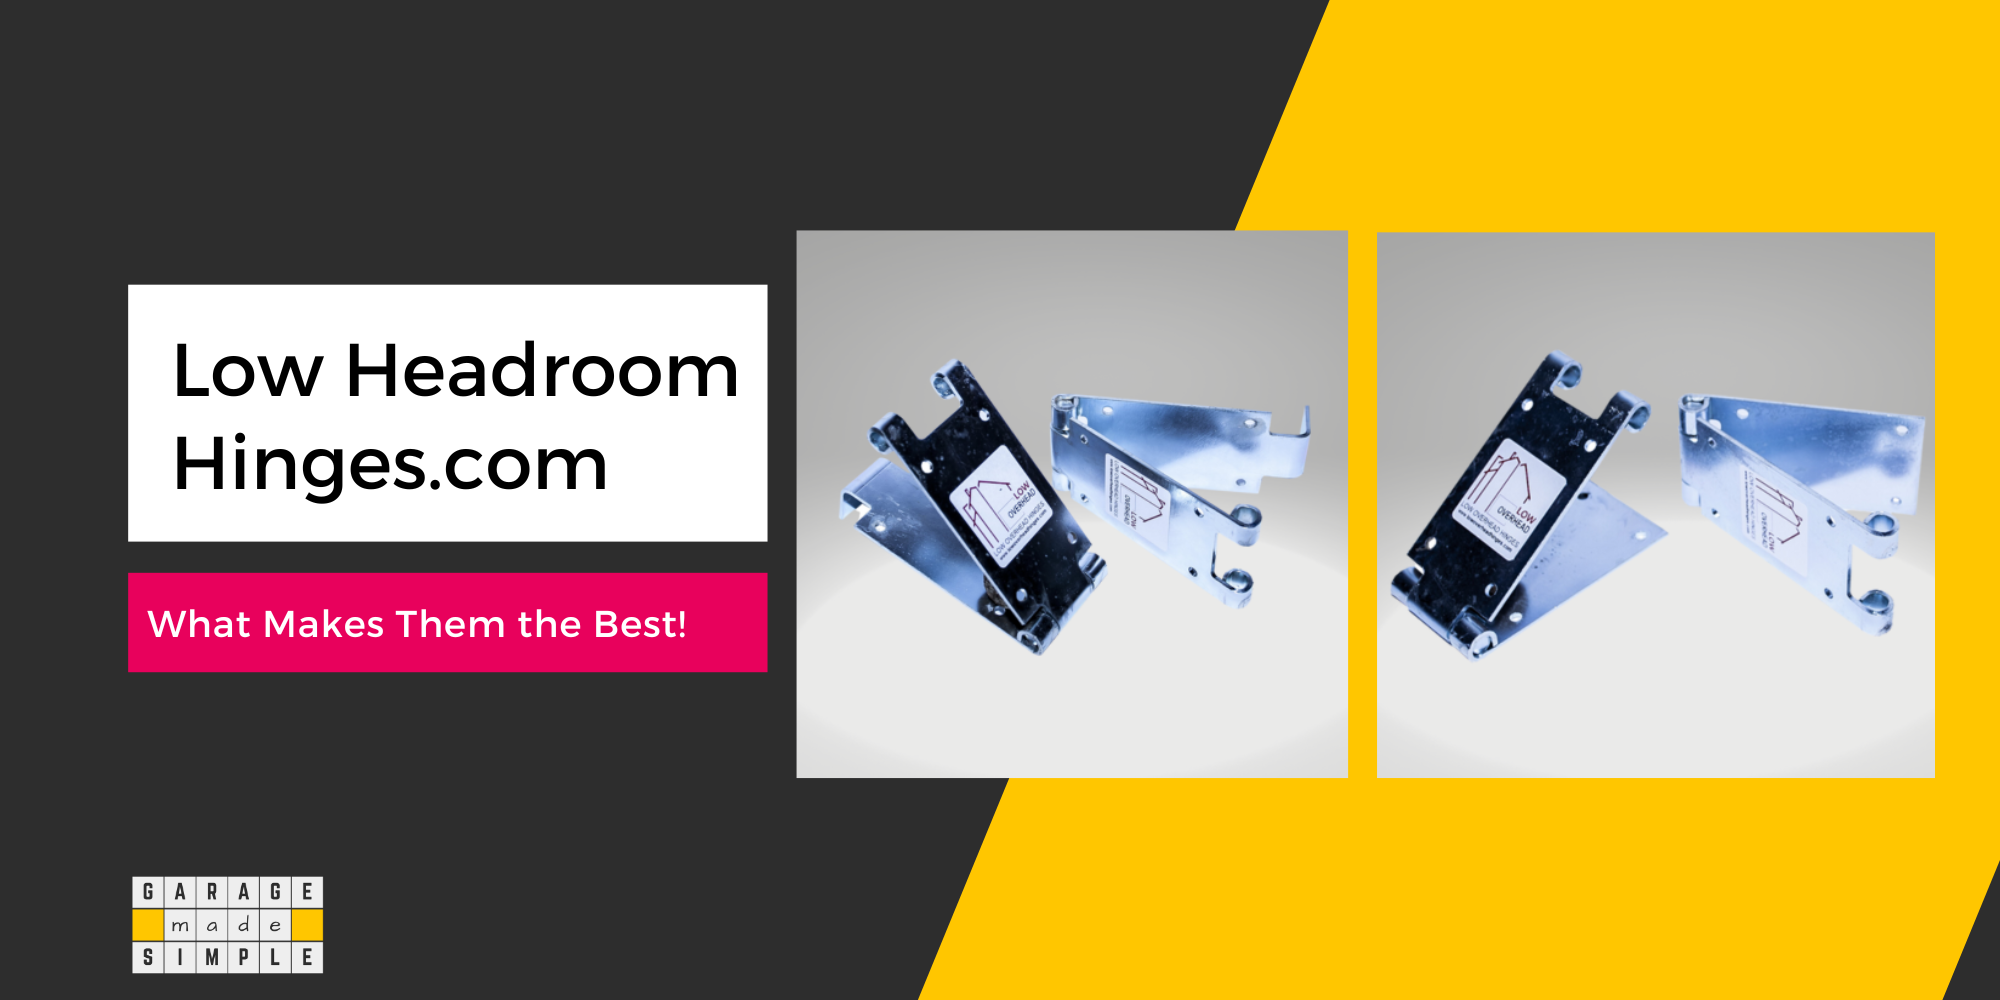 Low Headroom Hinges.com: What Makes Them the Best!